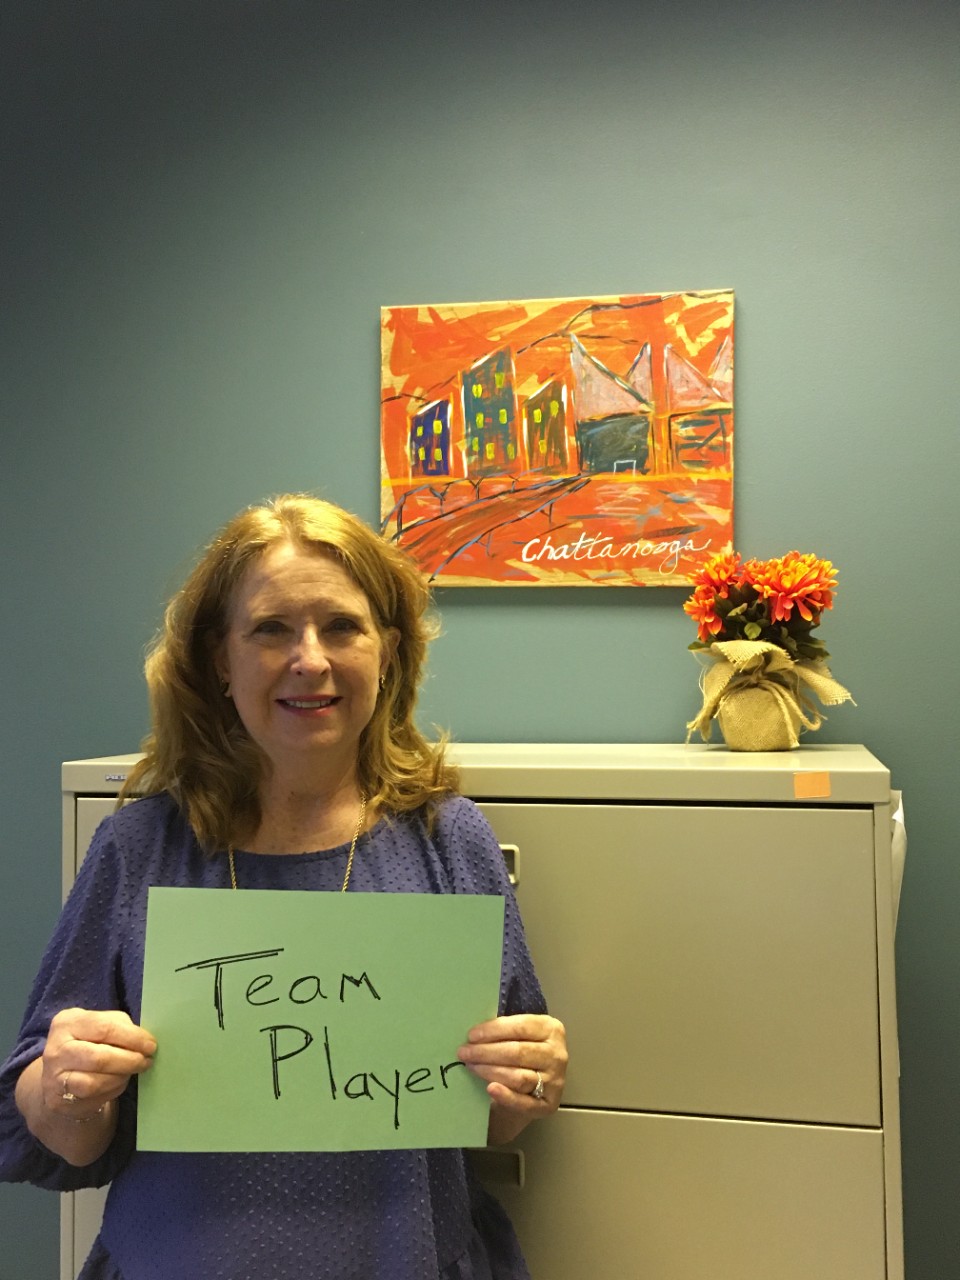 woman holding a sign that says "team player"